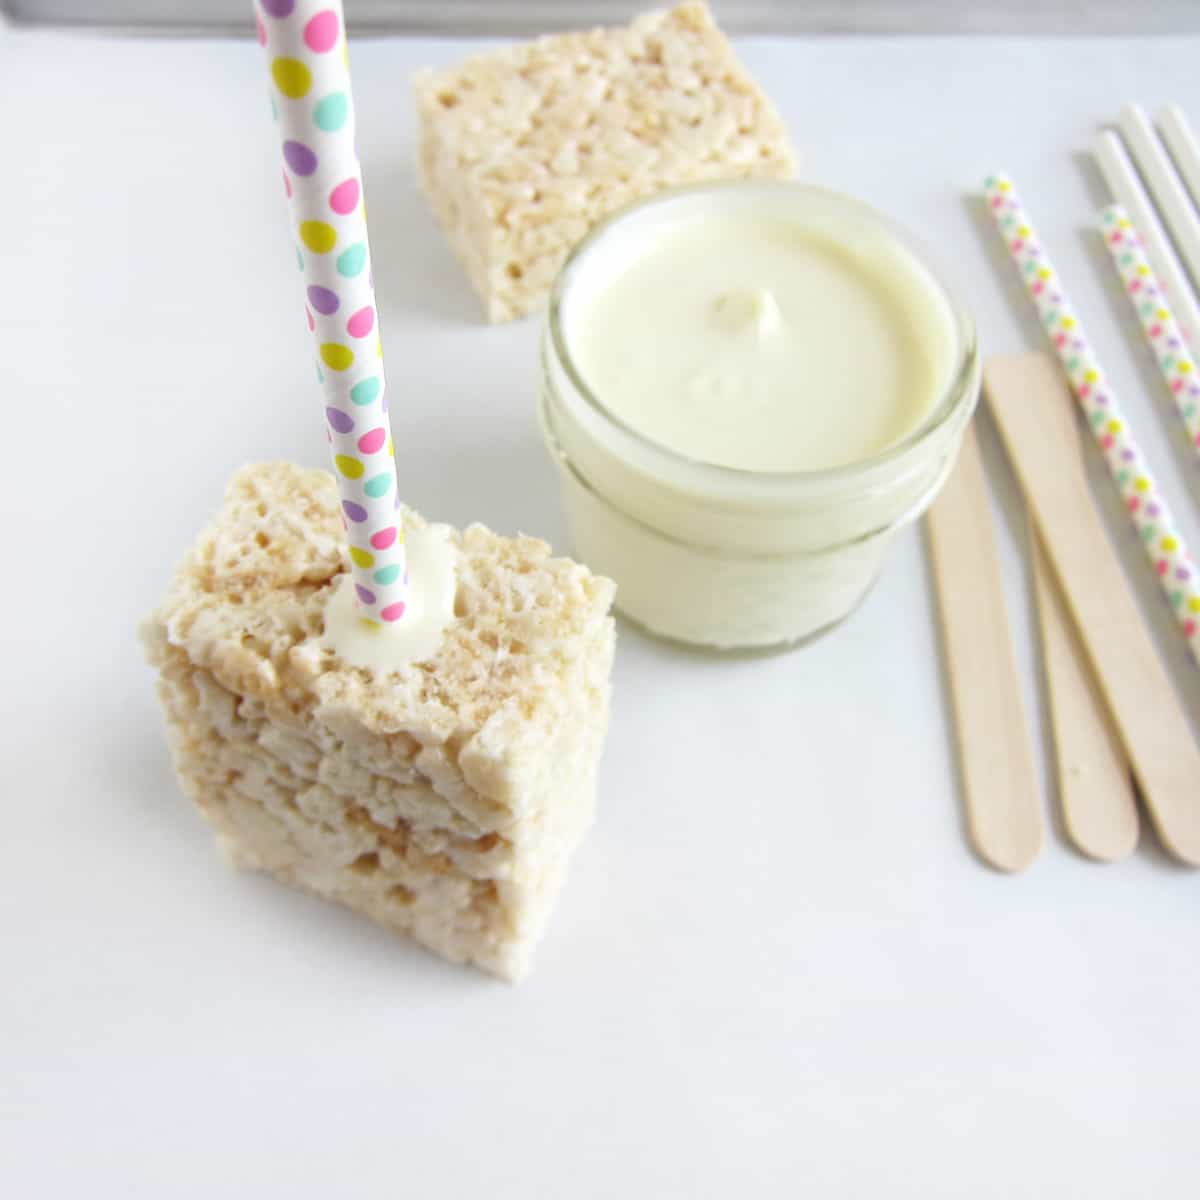 Rice Krispie treat with a polka dot paper straw inserted in one end secured with melted white chocolate.